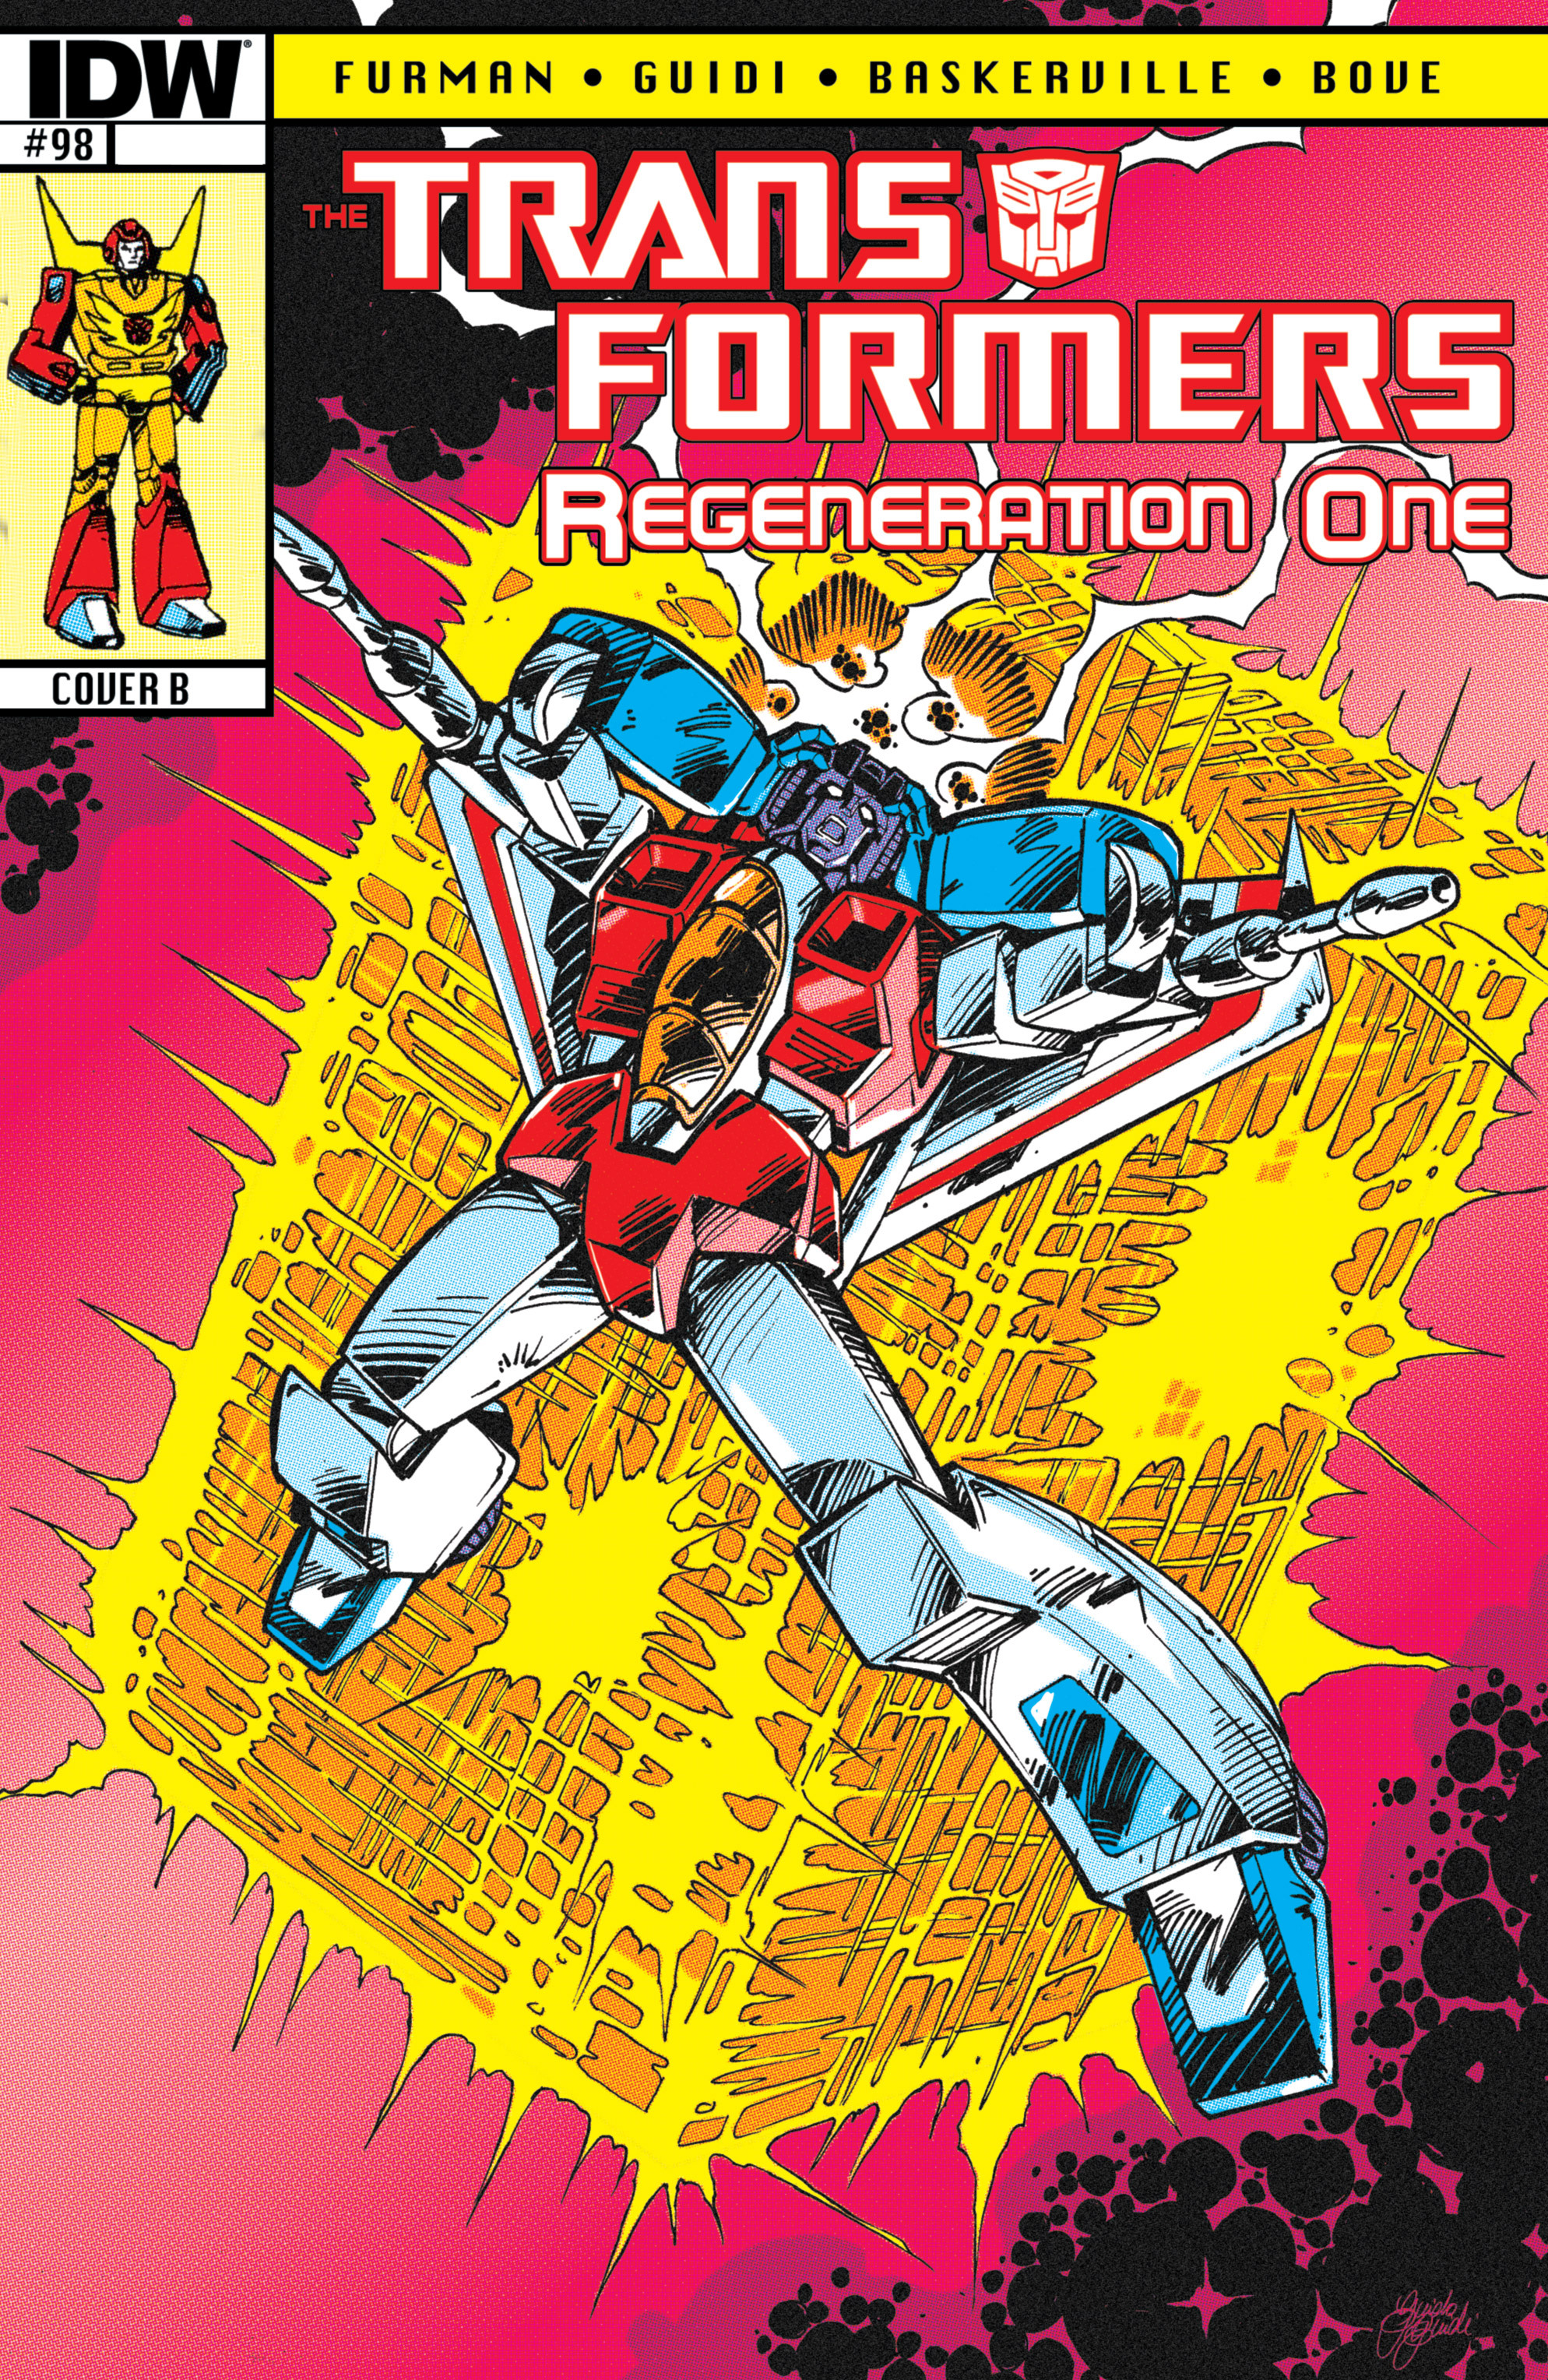 Read online The Transformers: Regeneration One comic -  Issue #98 - 3